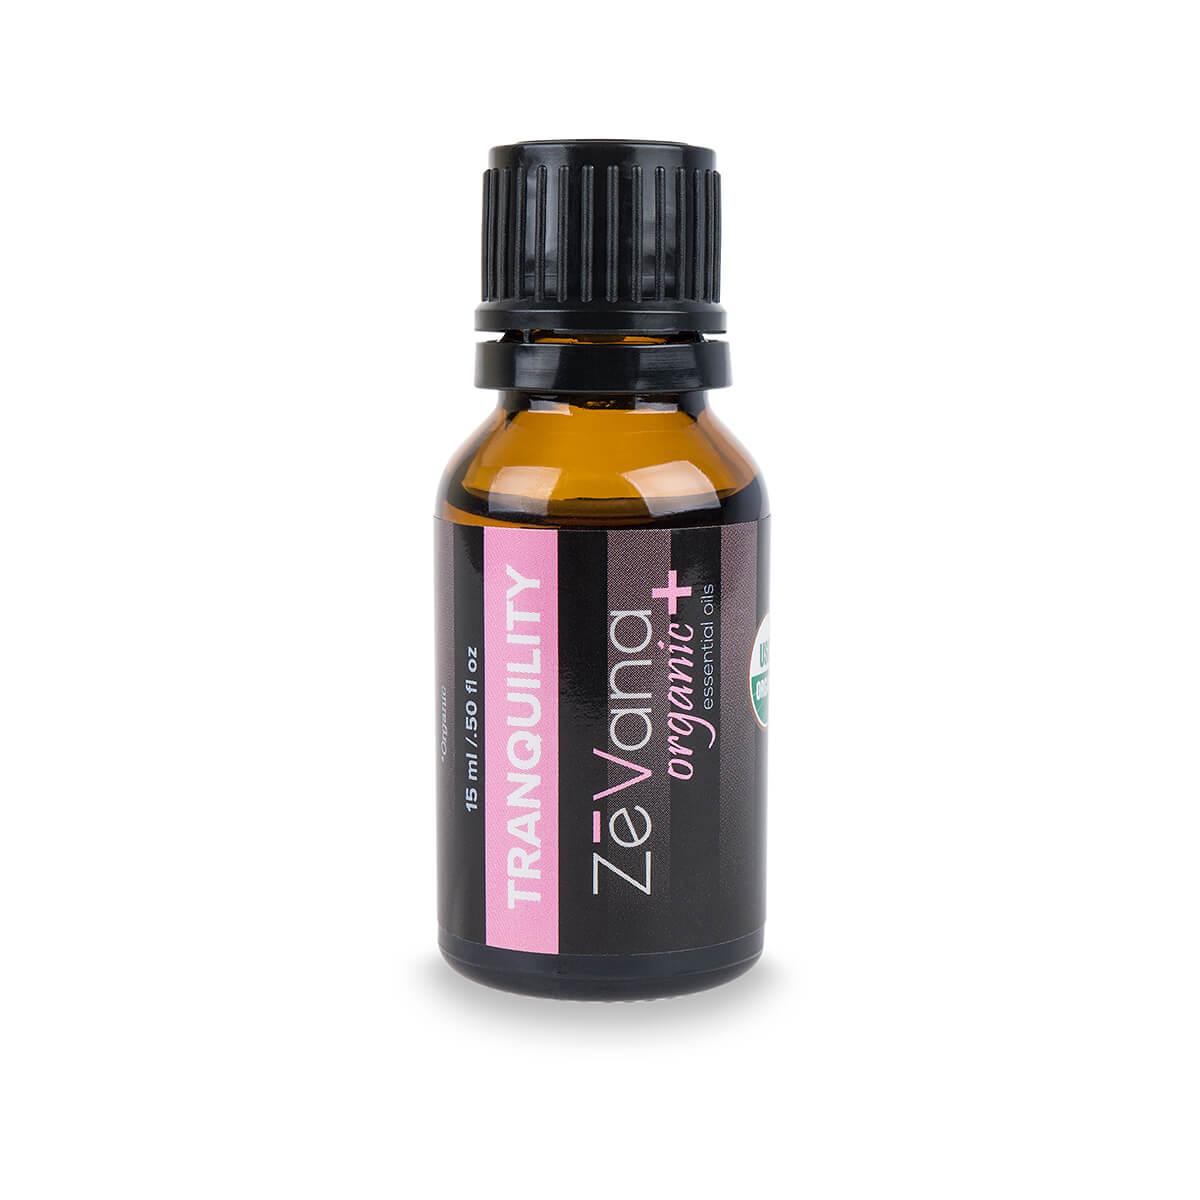  Tranquility Organic Essential Oil